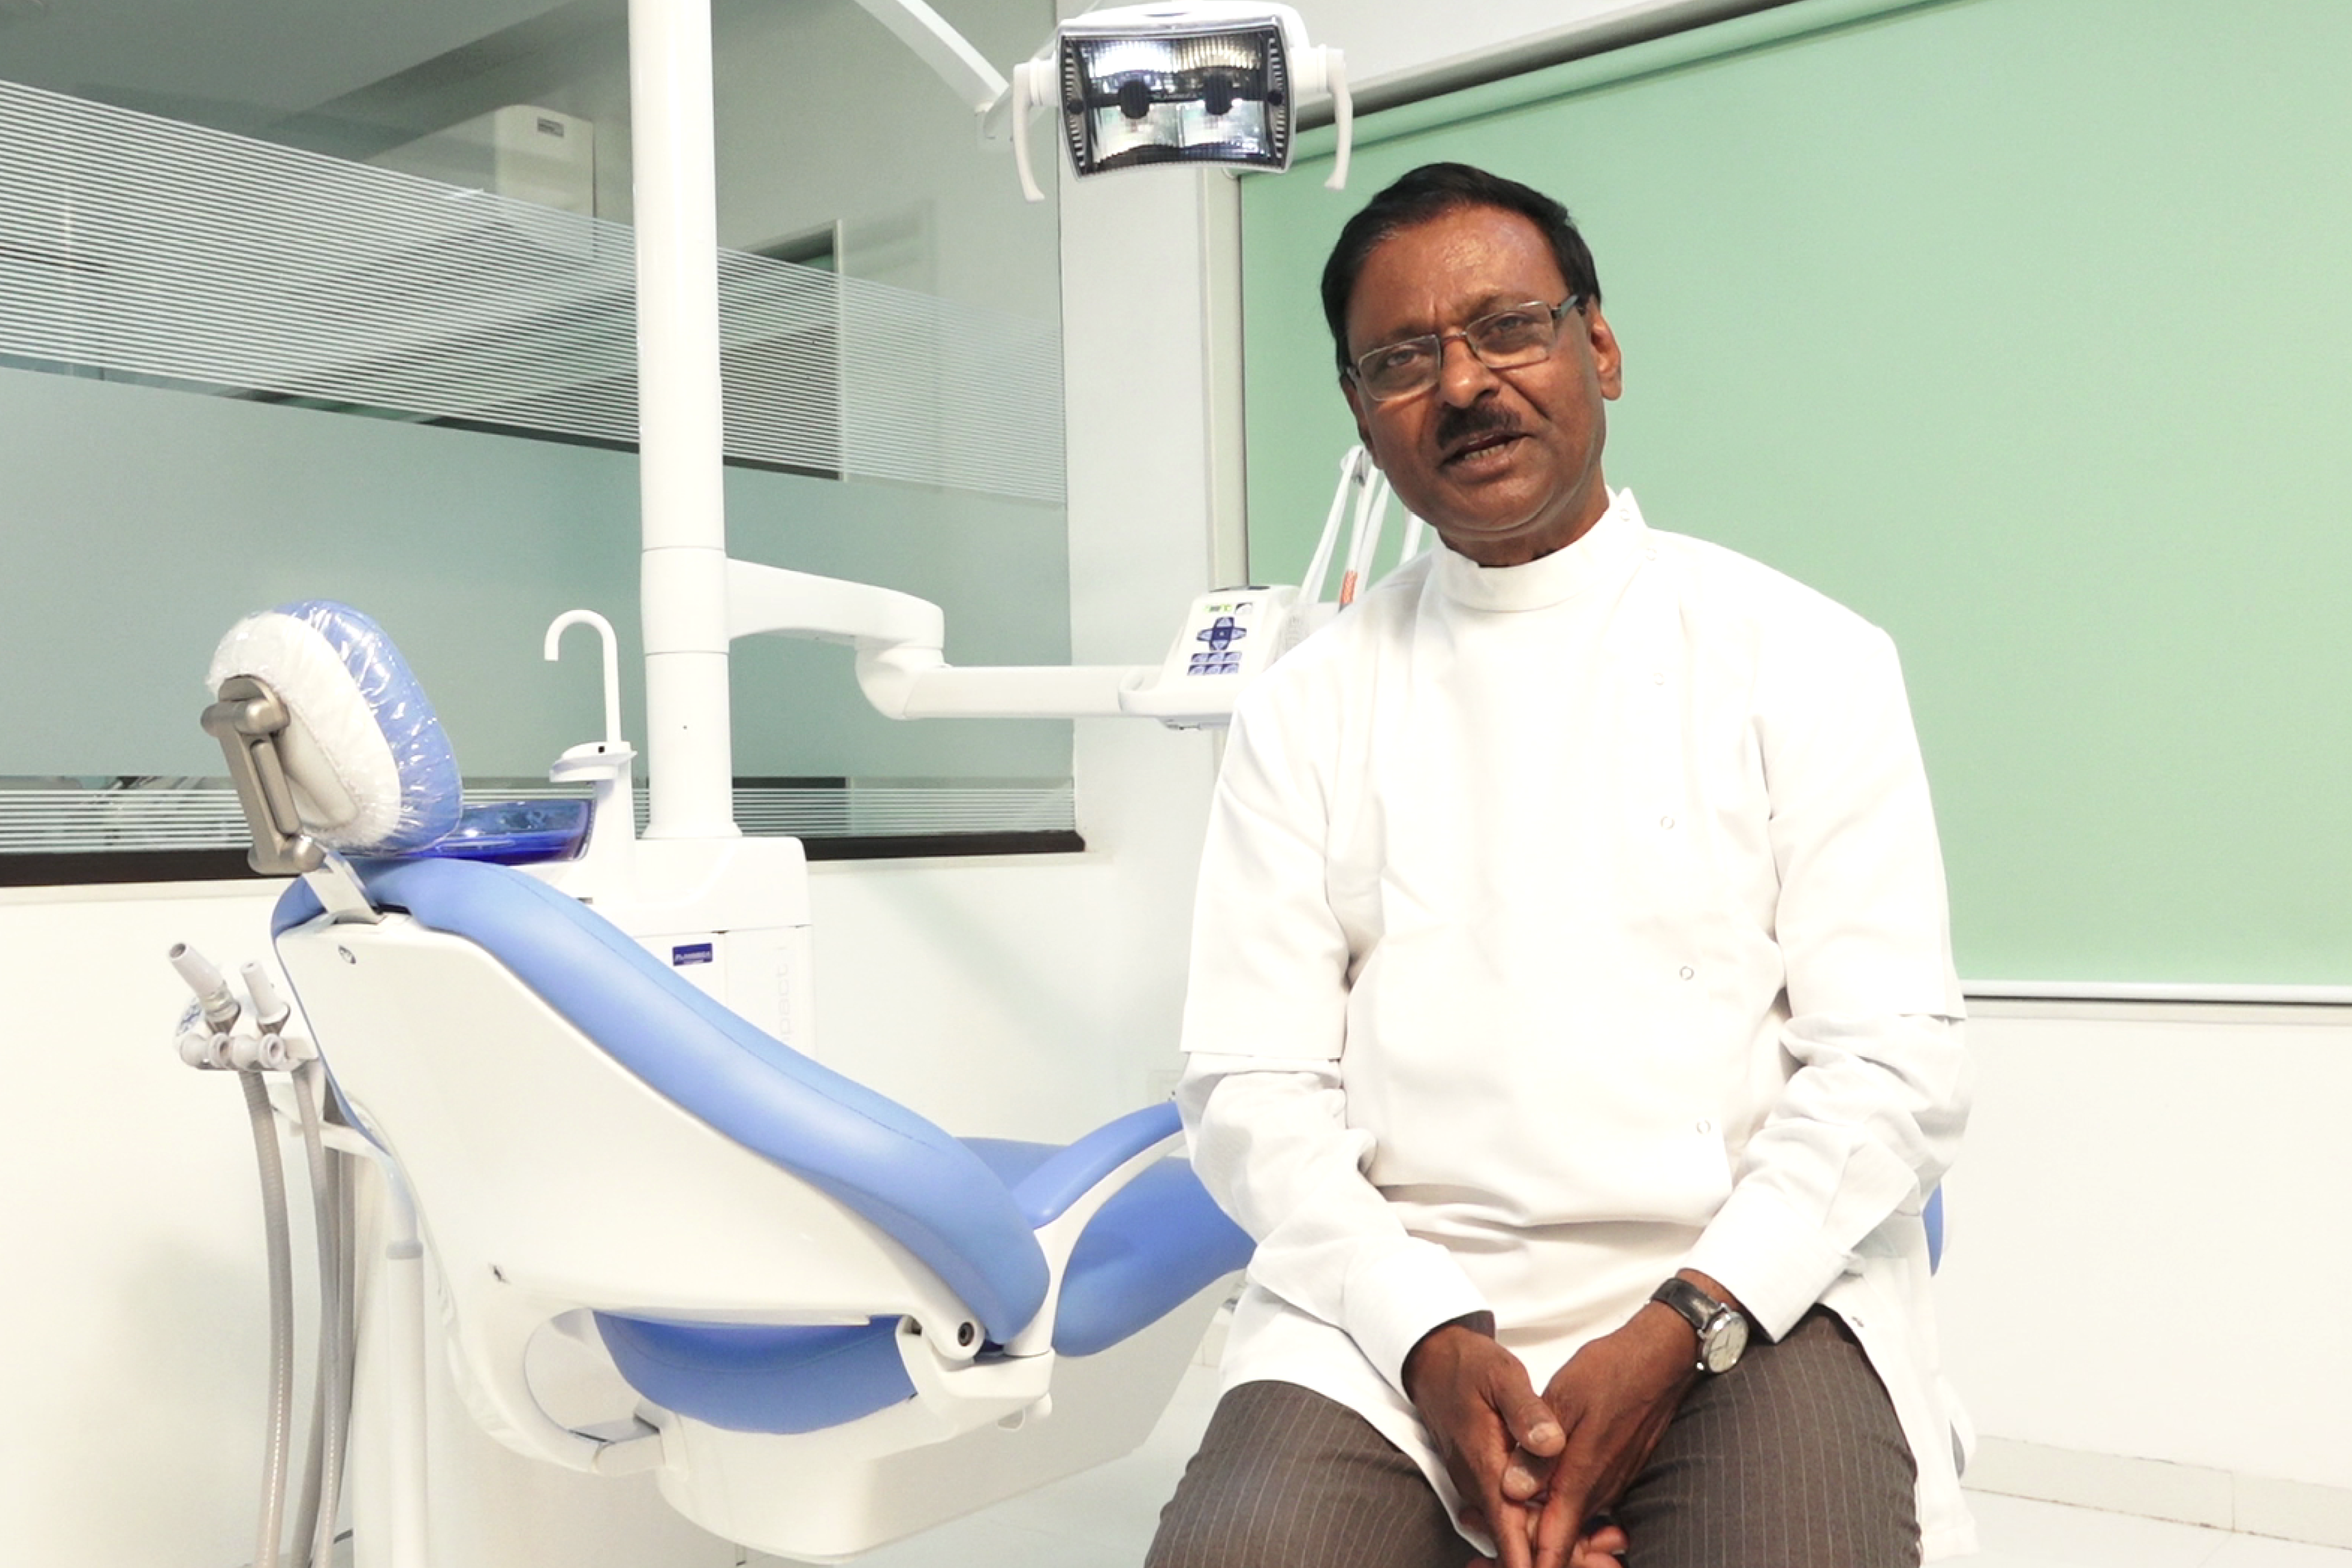 “I am happy to have made a mark in the dental field”